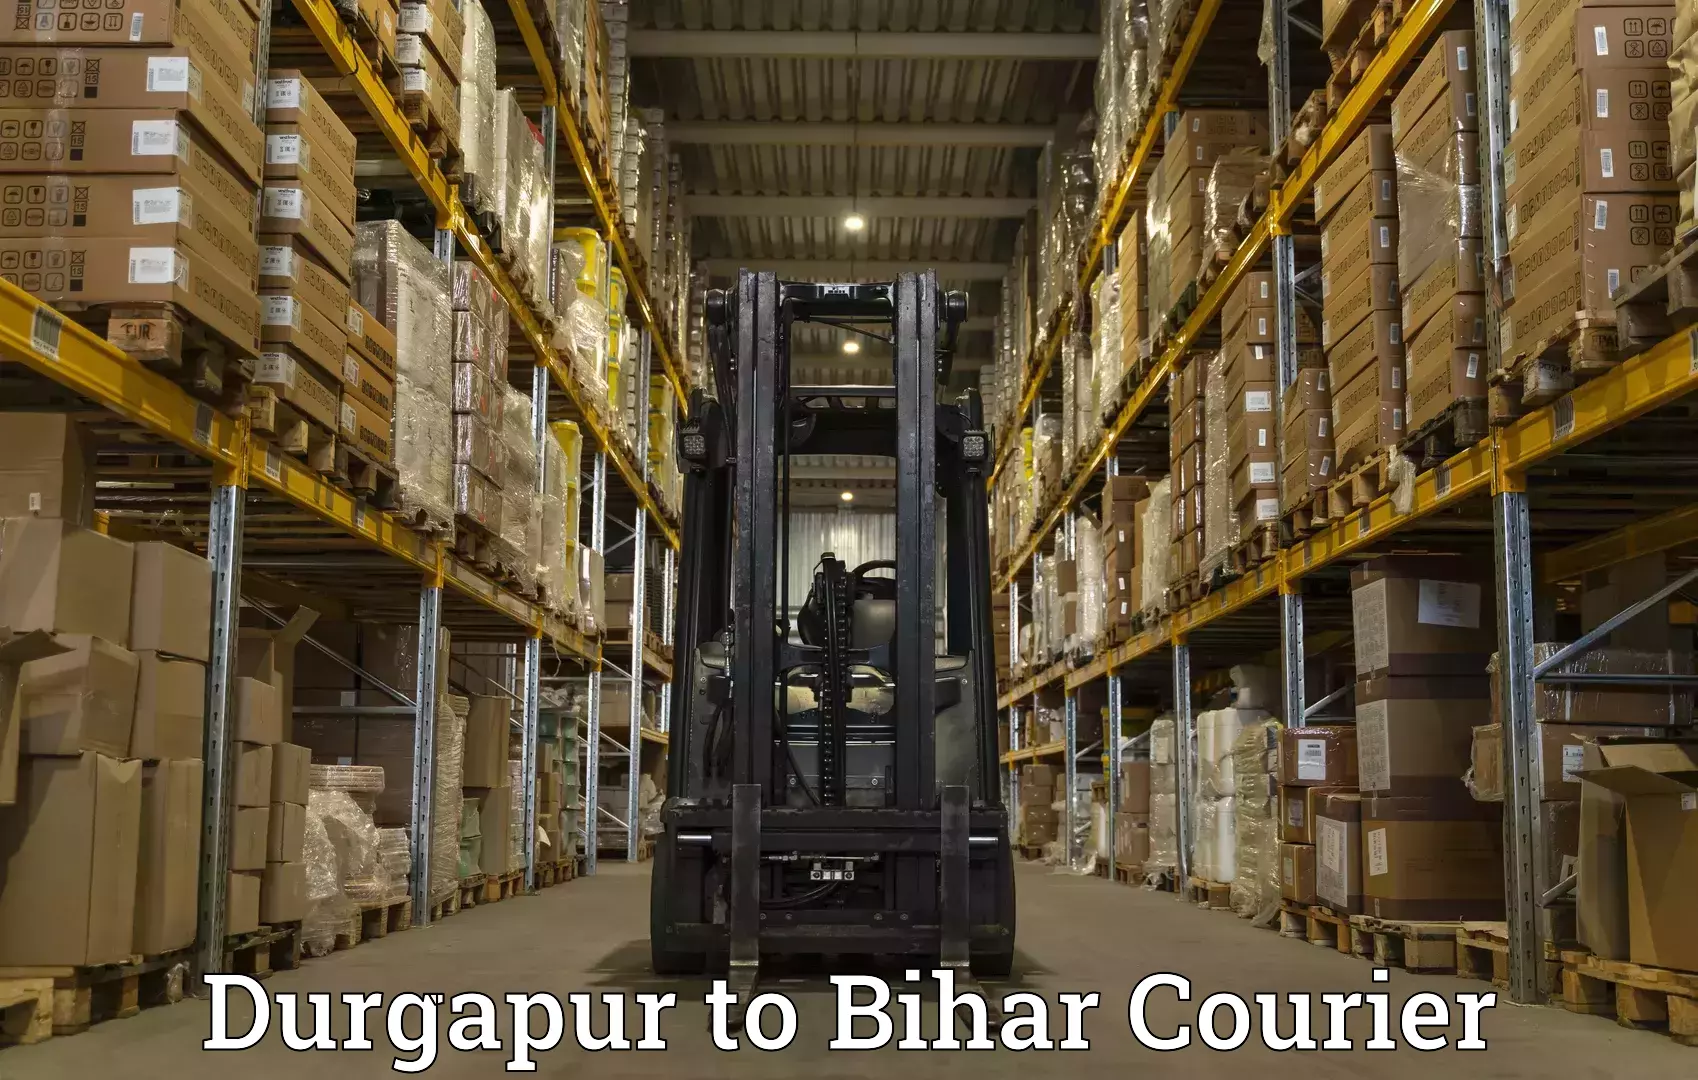 Multi-service courier options Durgapur to Rajgir